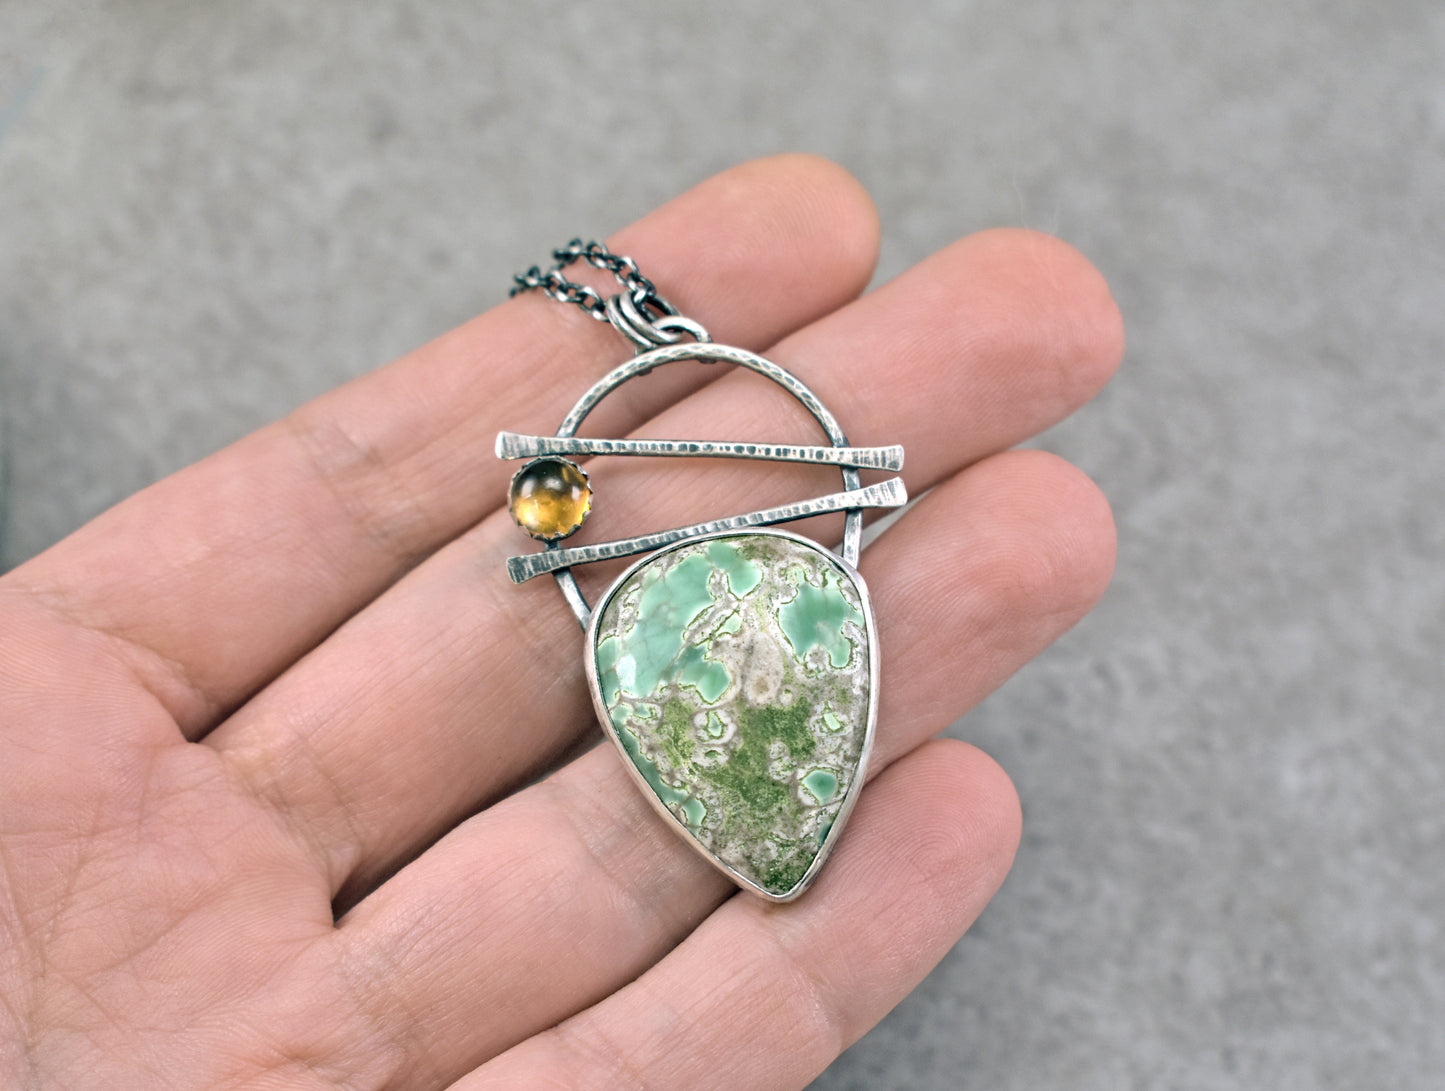 Variscite, Citrine and Sterling Silver Necklace, Rustic Silversmith Pendant, Artisan Handmade Jewelry